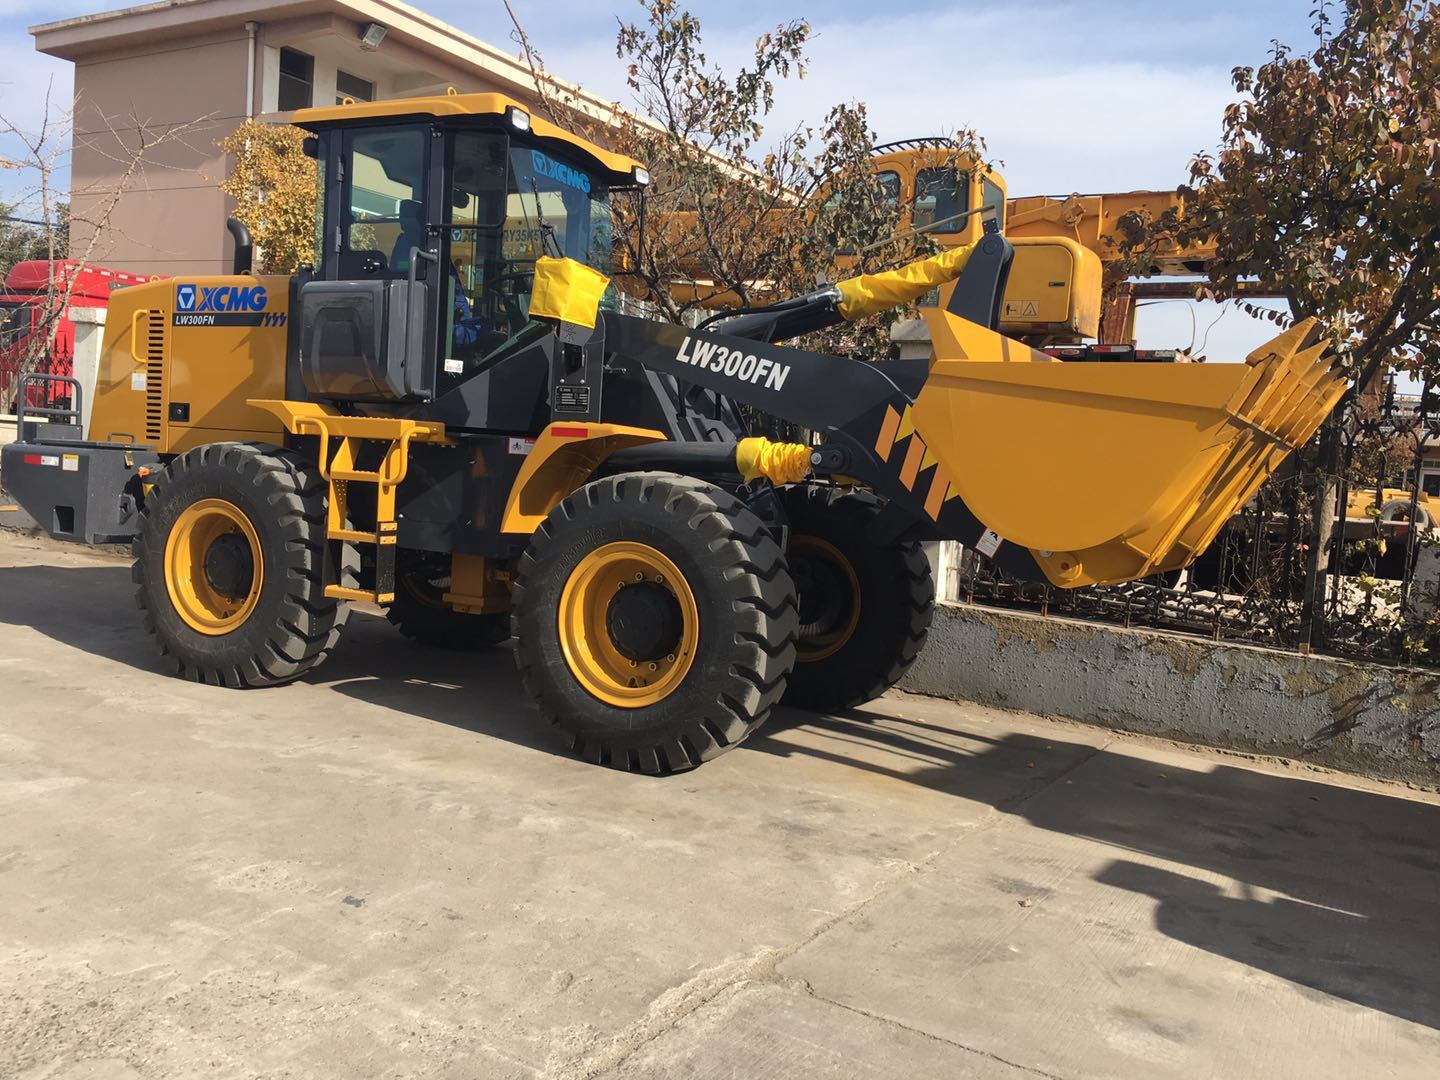 3 Ton Wheel Loader Lw300fn with Manual Control and Cheap Price